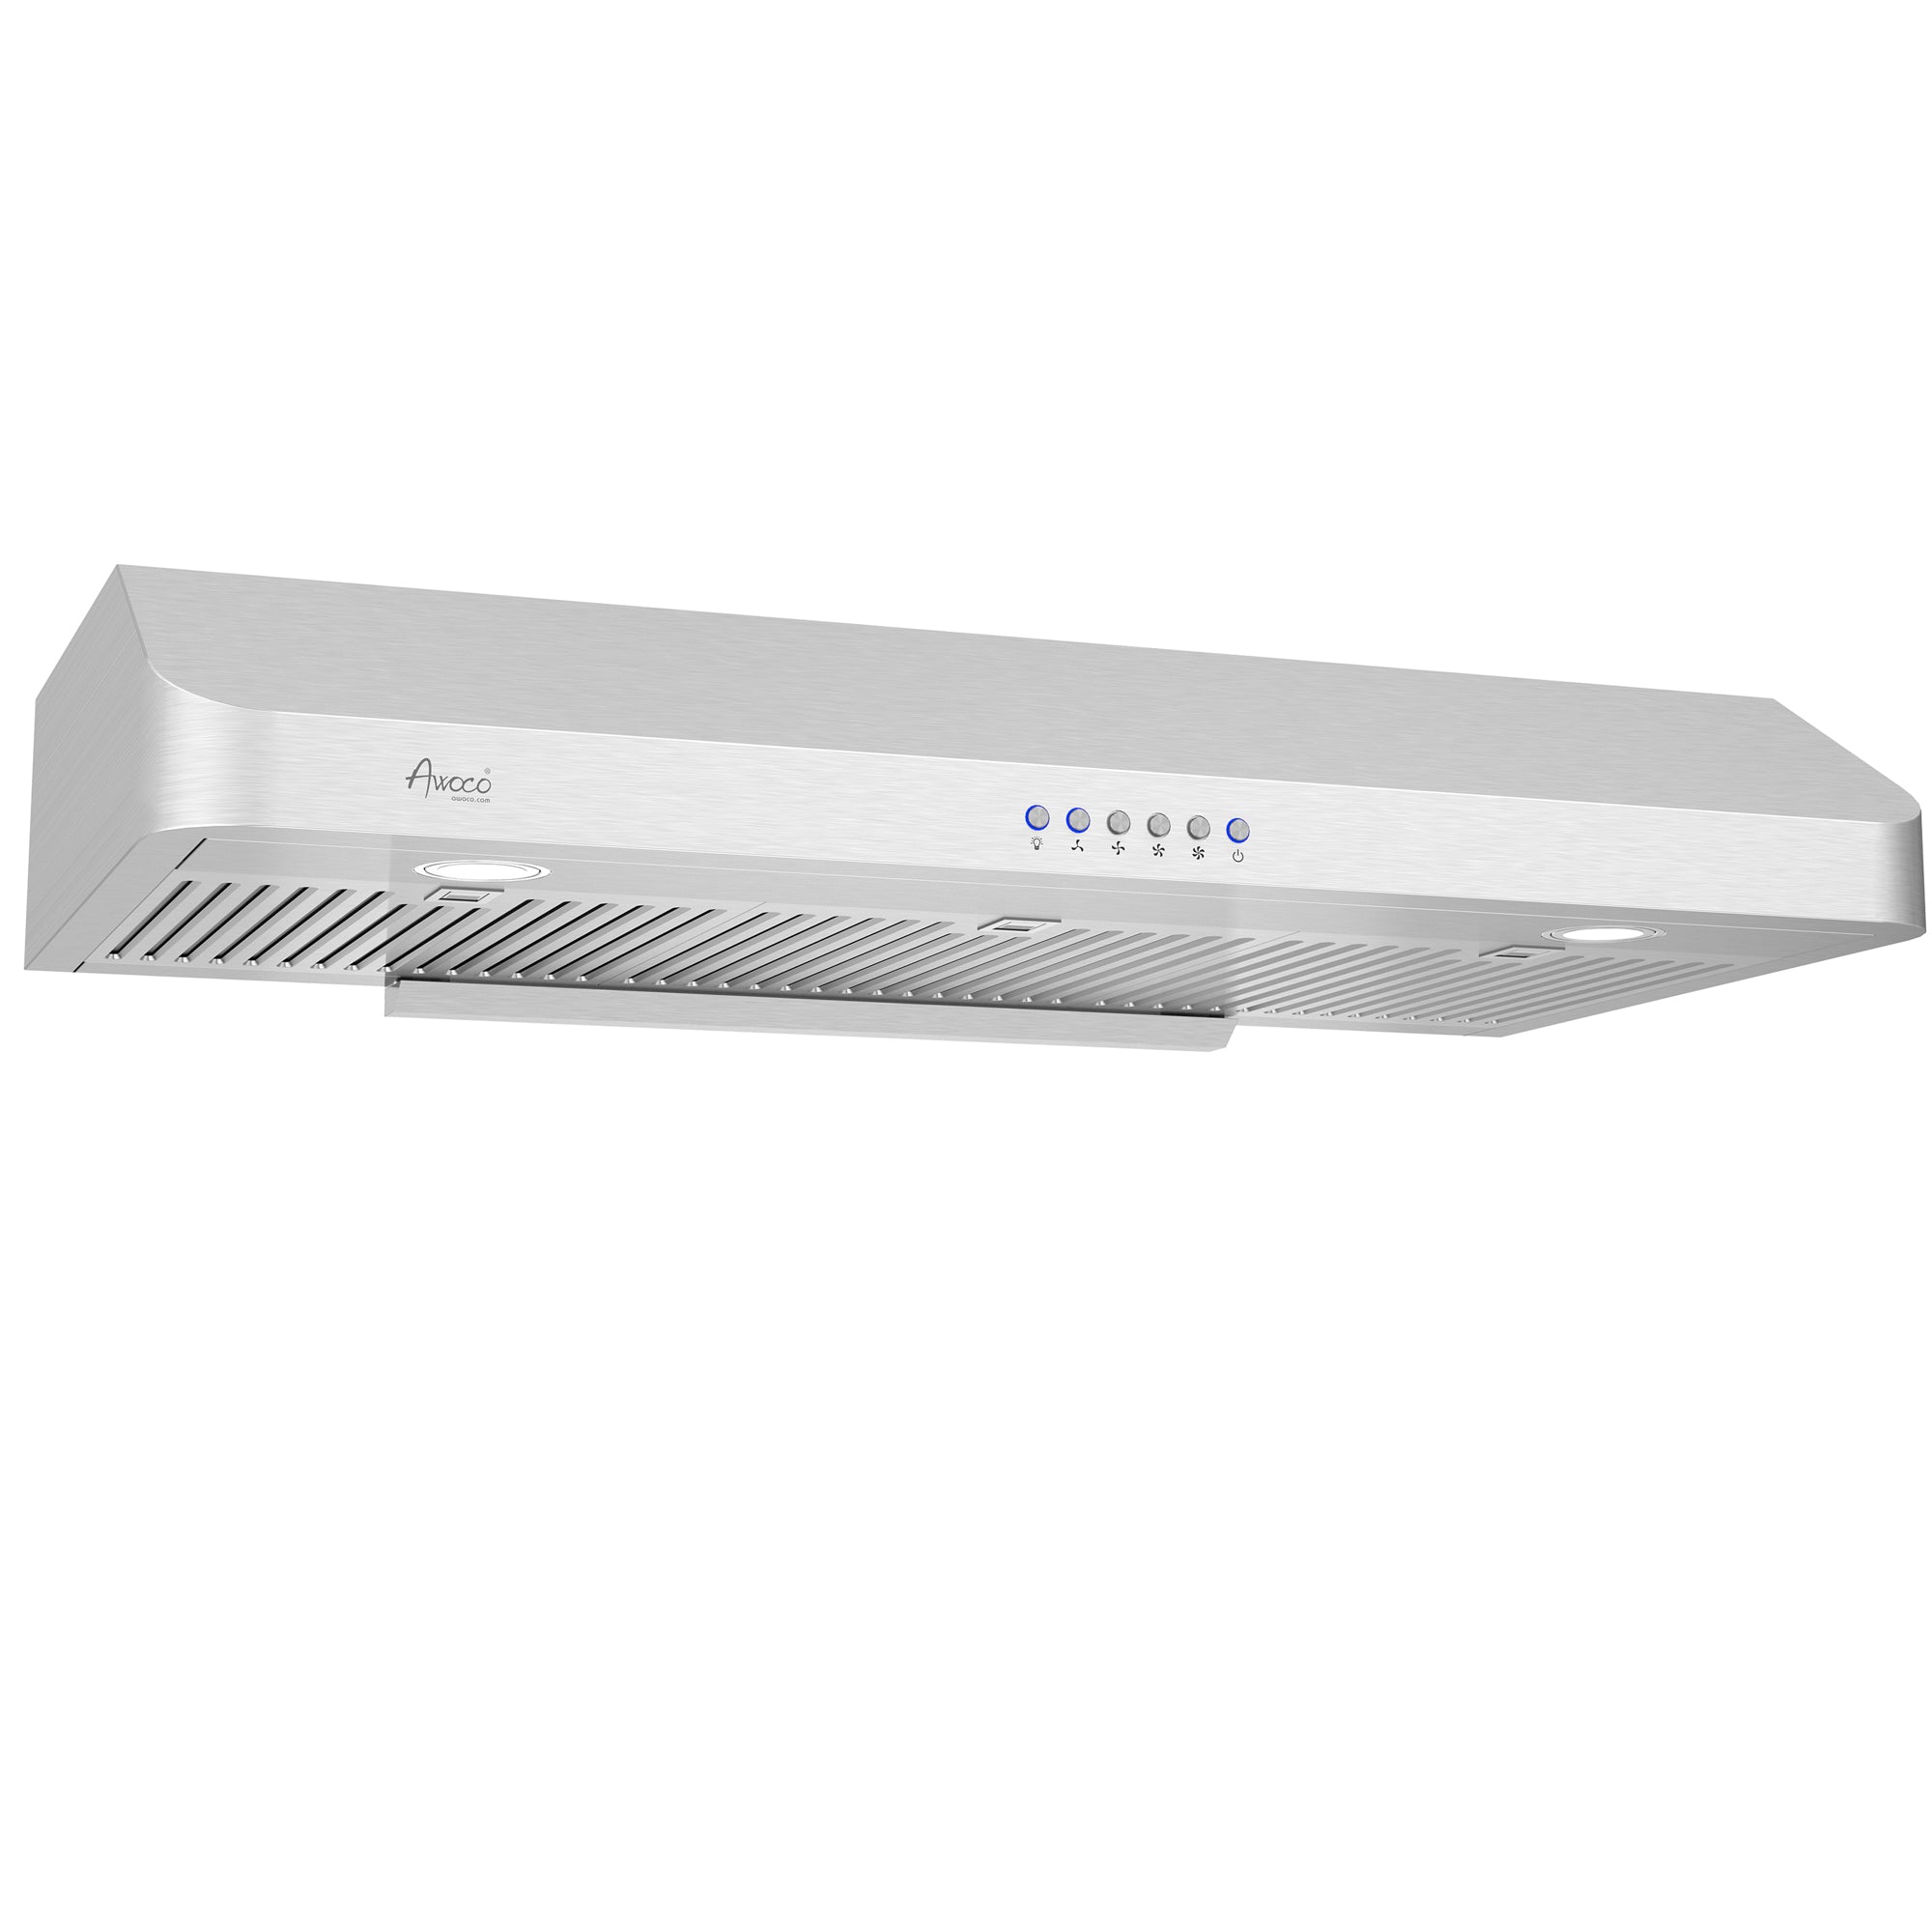 Awoco RH-R06-42 Rectangle Vent 6" High Stainless Steel Under Cabinet 4 Speeds 900CFM Range Hood with LED Lights